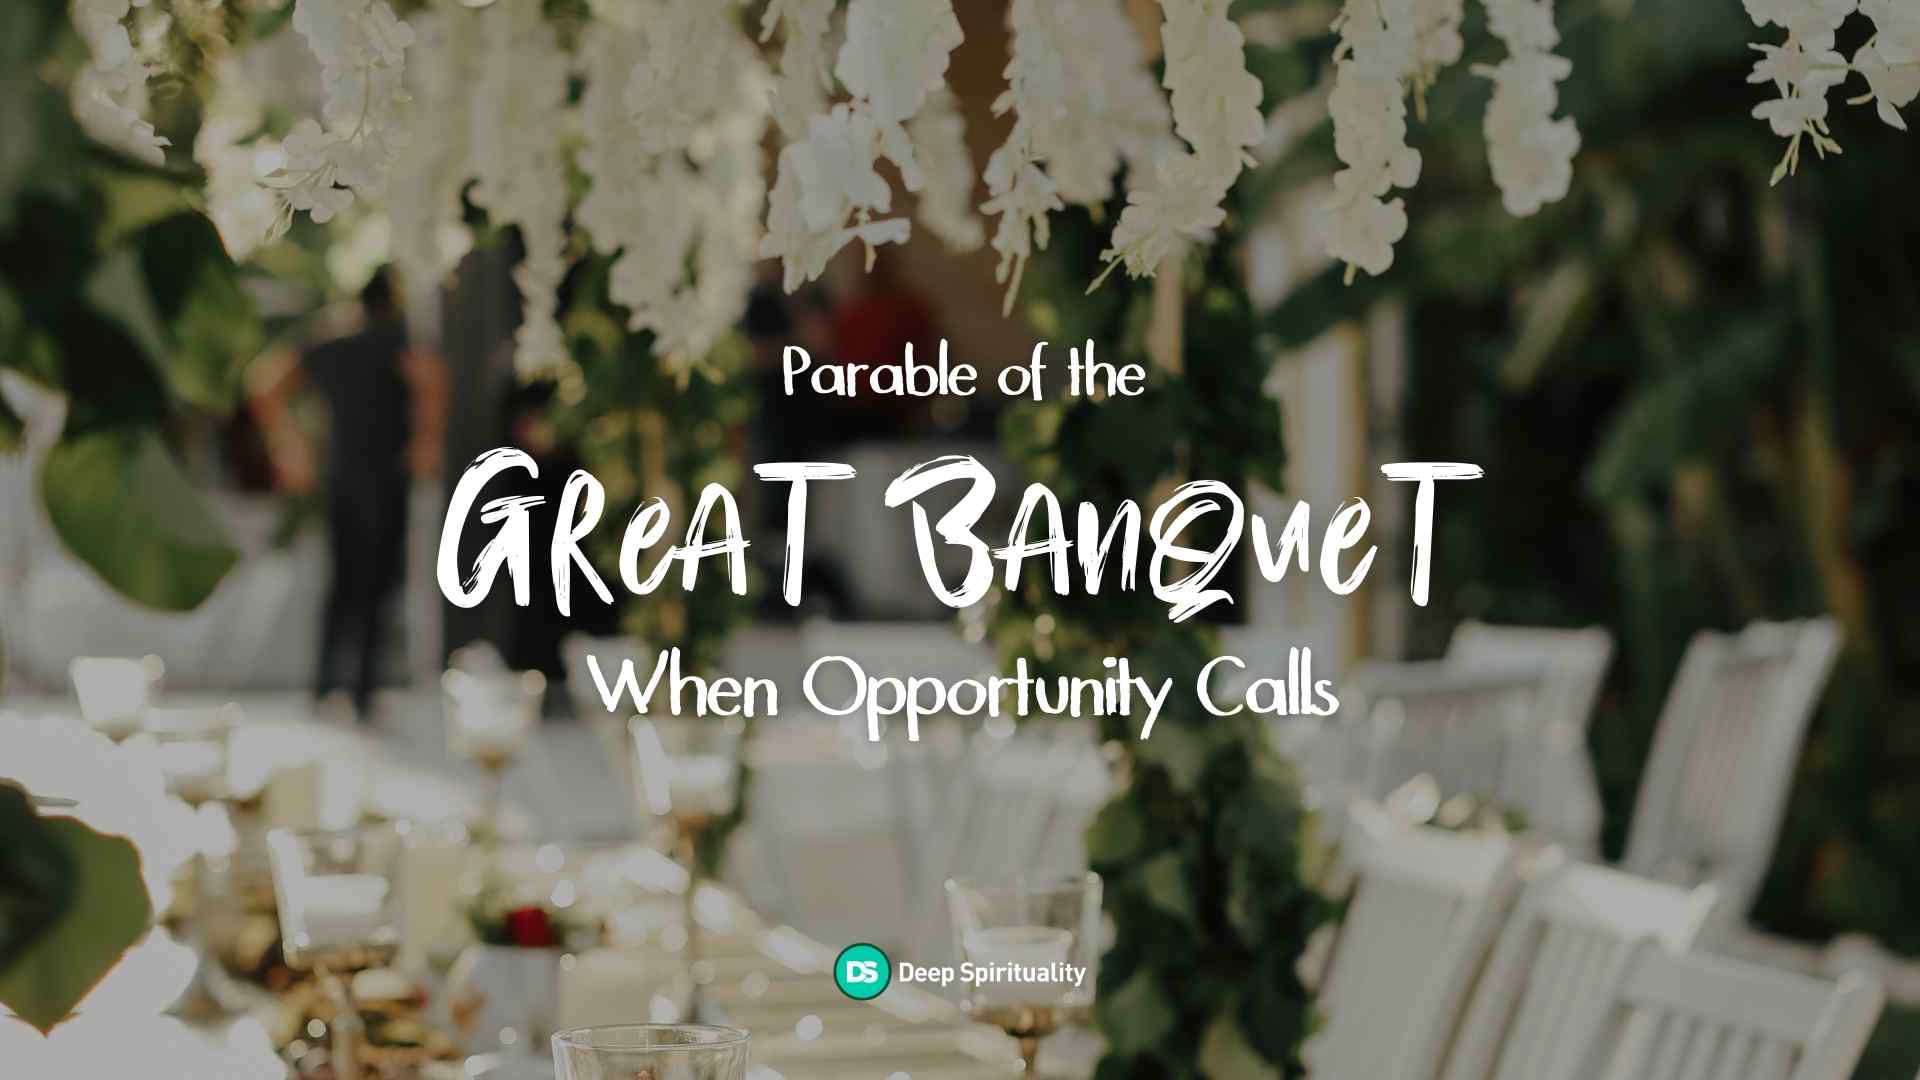 Parable of the Great Banquet: When Opportunity Calls 5